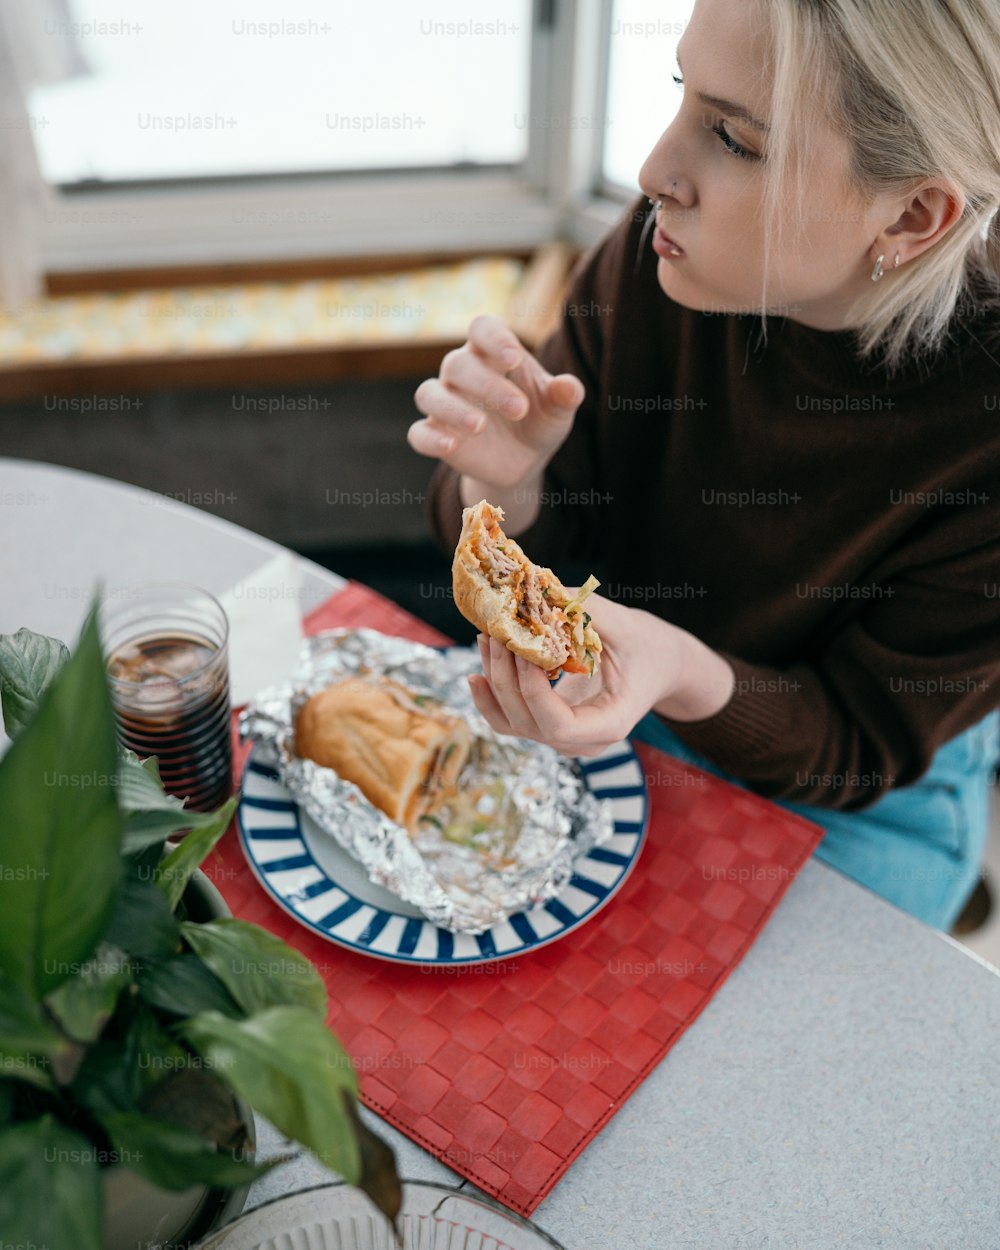 a woman sitting at a table eating a sandwich